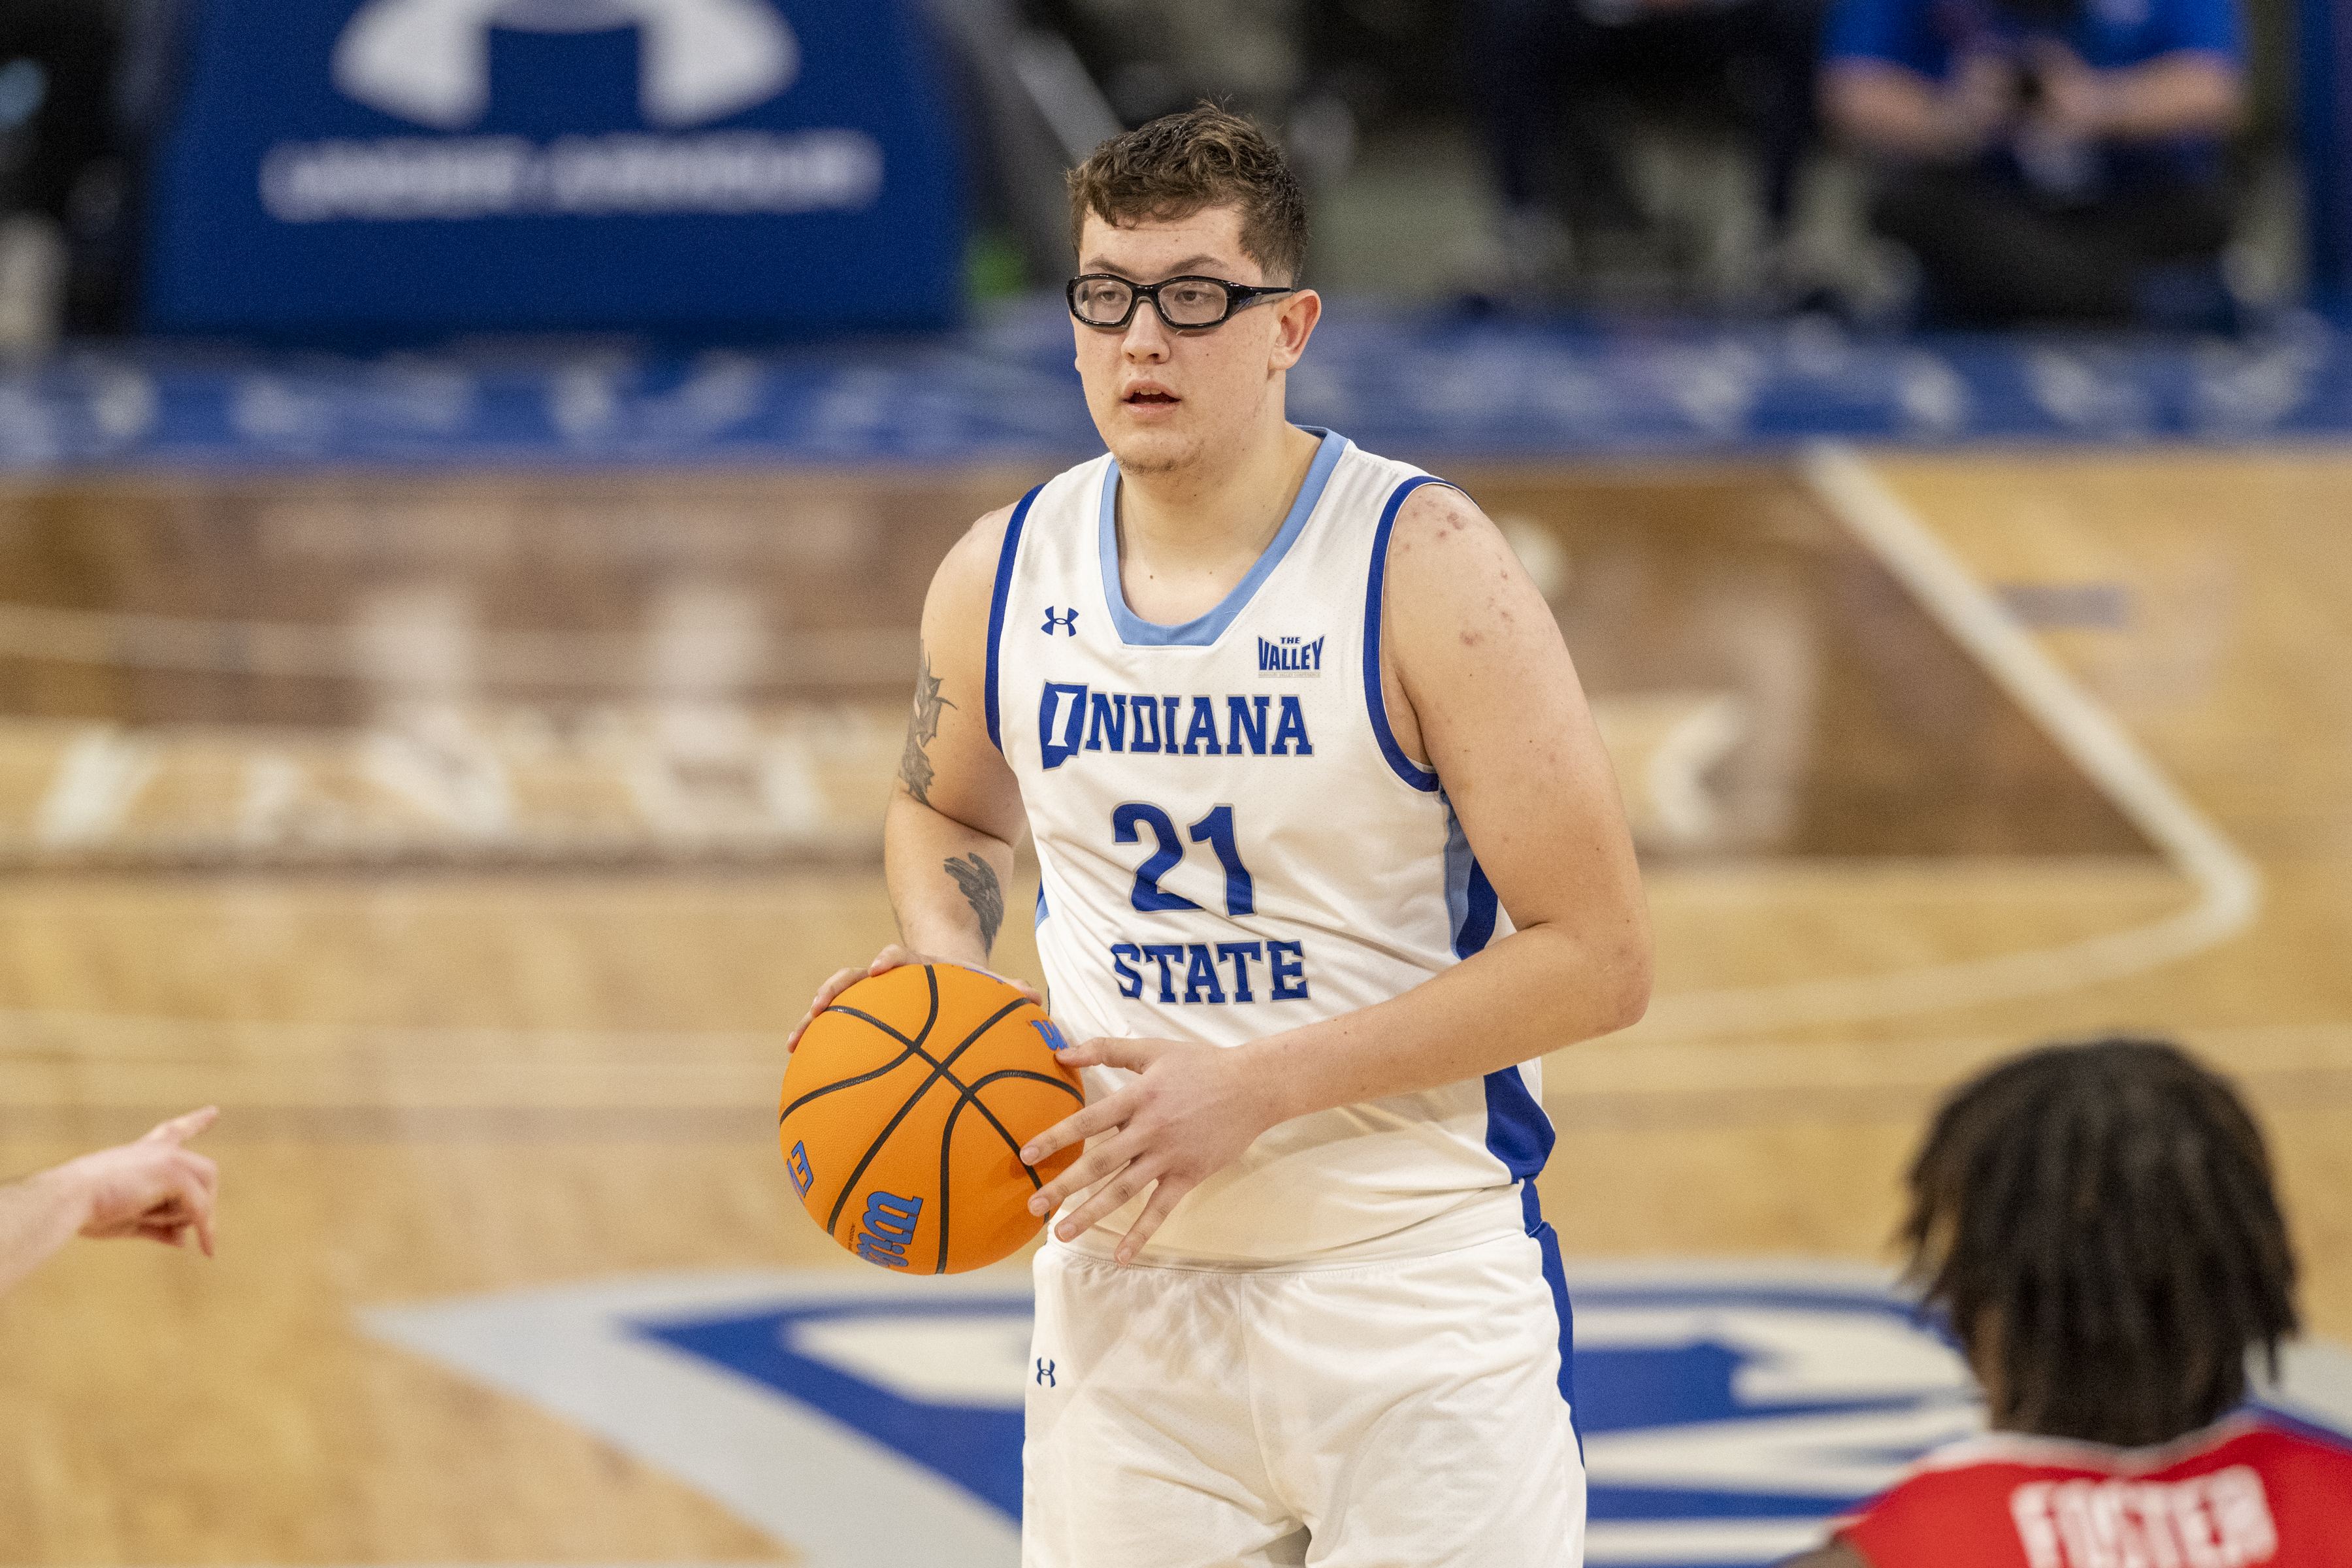 Indiana State center Robbie Avila, who played high school basketball at Oak Forest, is one of the biggest local names in the college transfer portal.